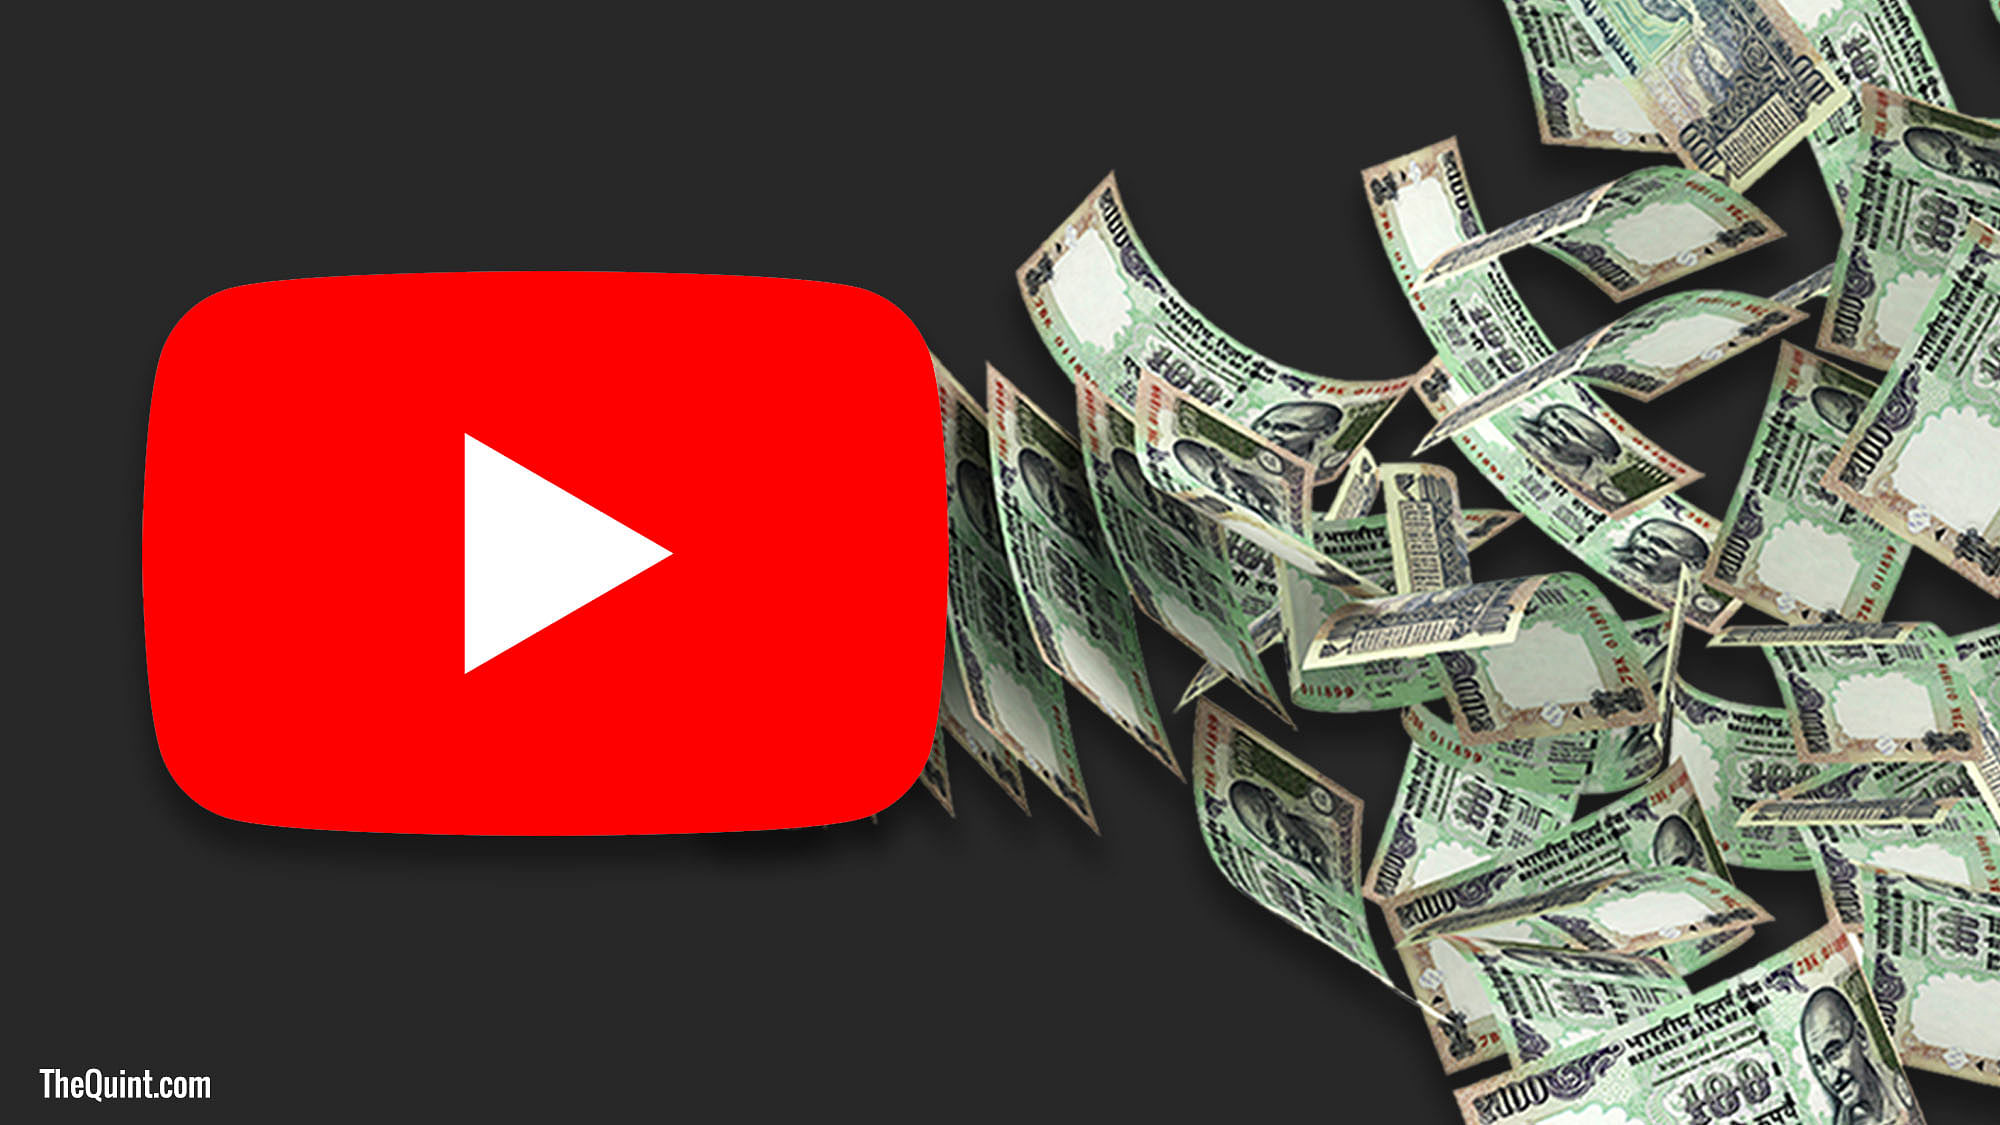 Google’s annual revenue generated from YouTube is almost 4 billion US dollars